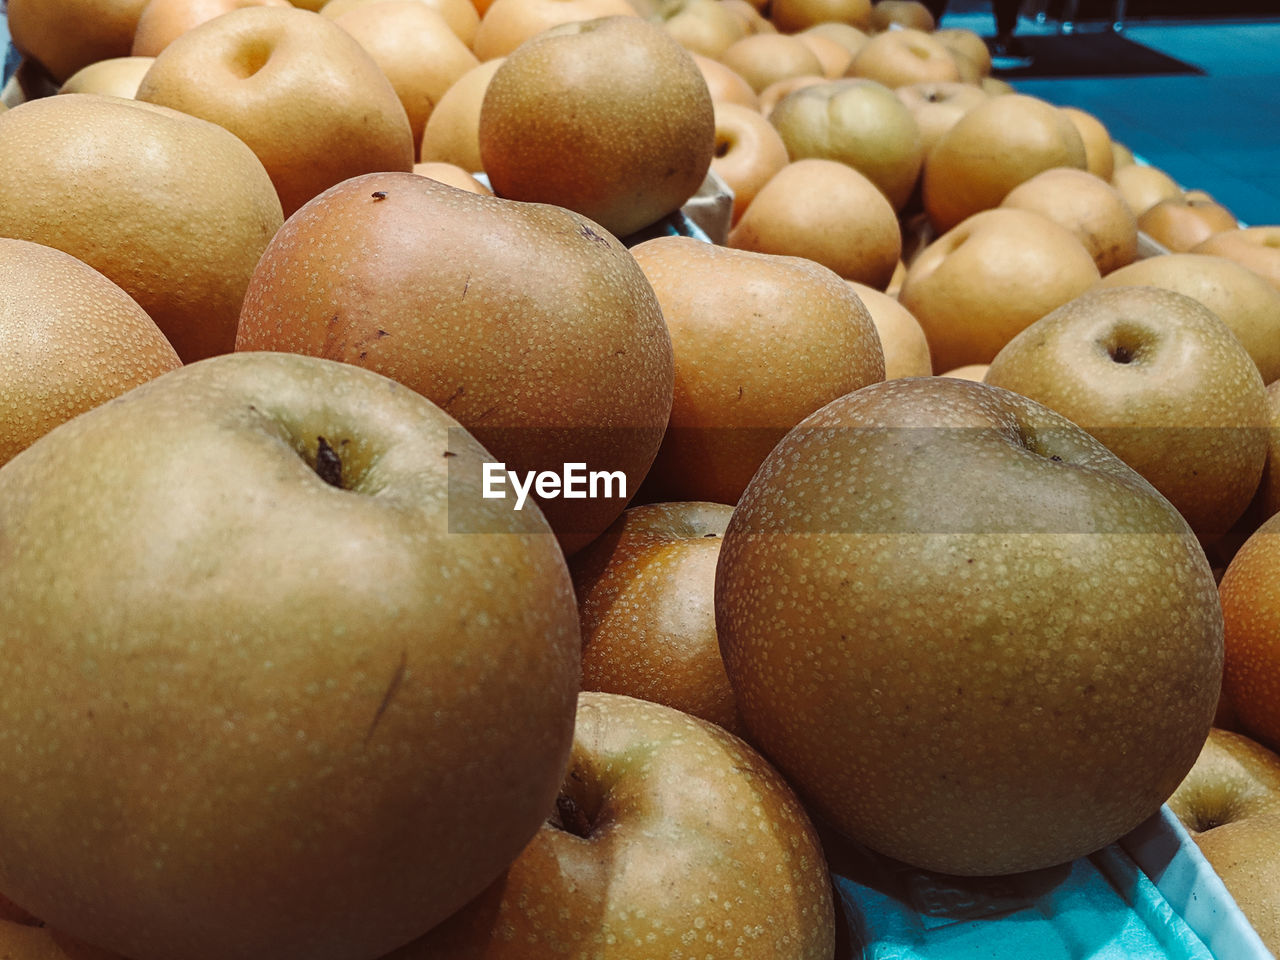 CLOSE-UP OF APPLES IN MARKET